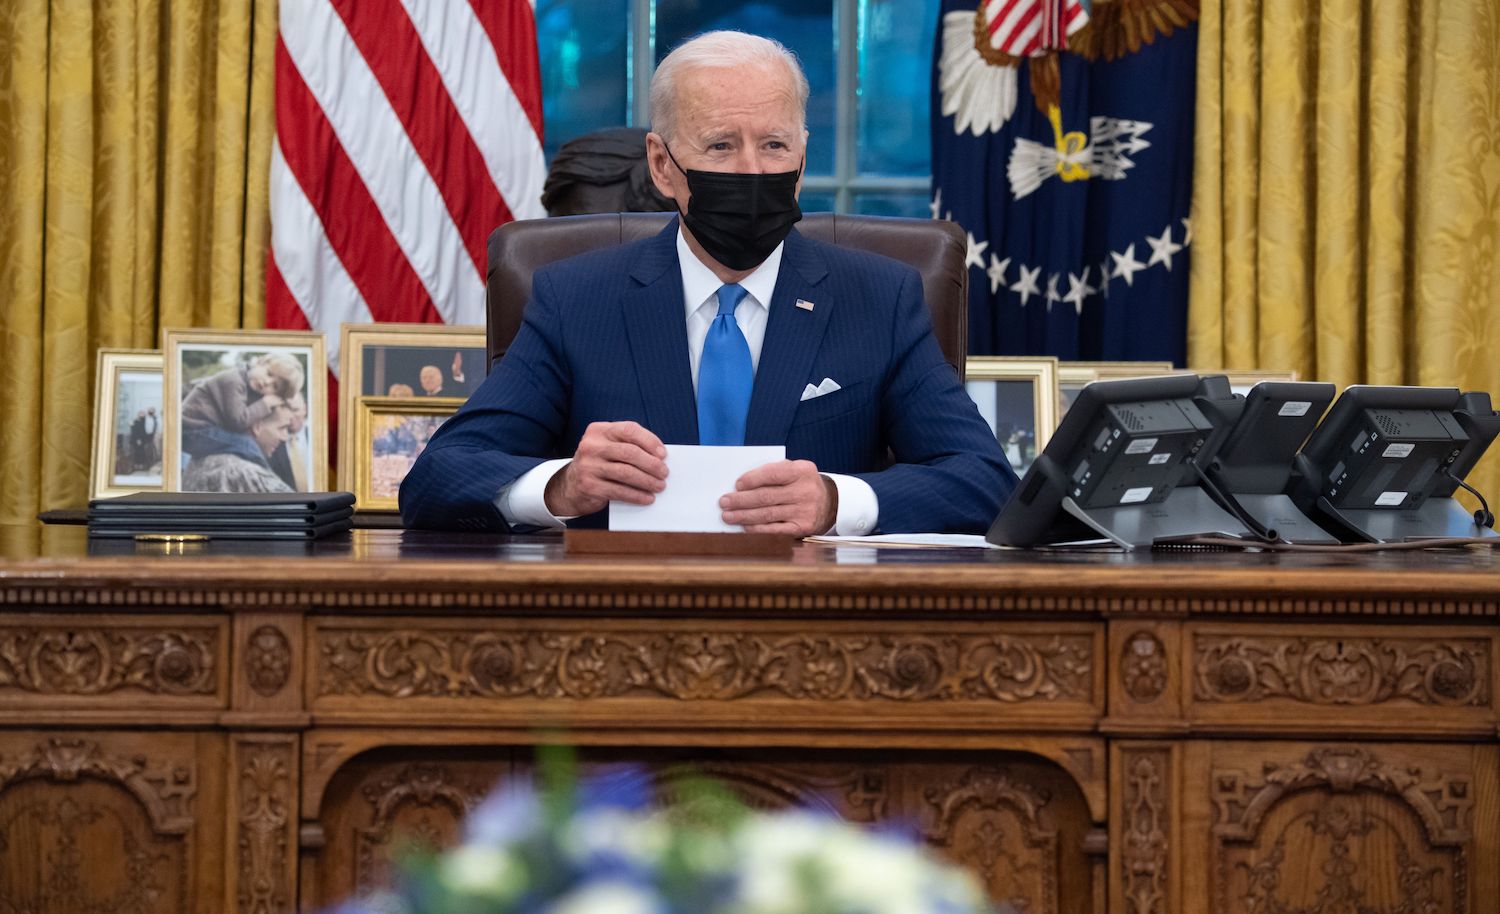 US President Joe Biden speaks before signing executive orders related to immigration in the Oval Office of the White House in Washington, DC, February 2, 2021. (Photo by SAUL LOEB / AFP) (Photo by SAUL LOEB/AFP via Getty Images)